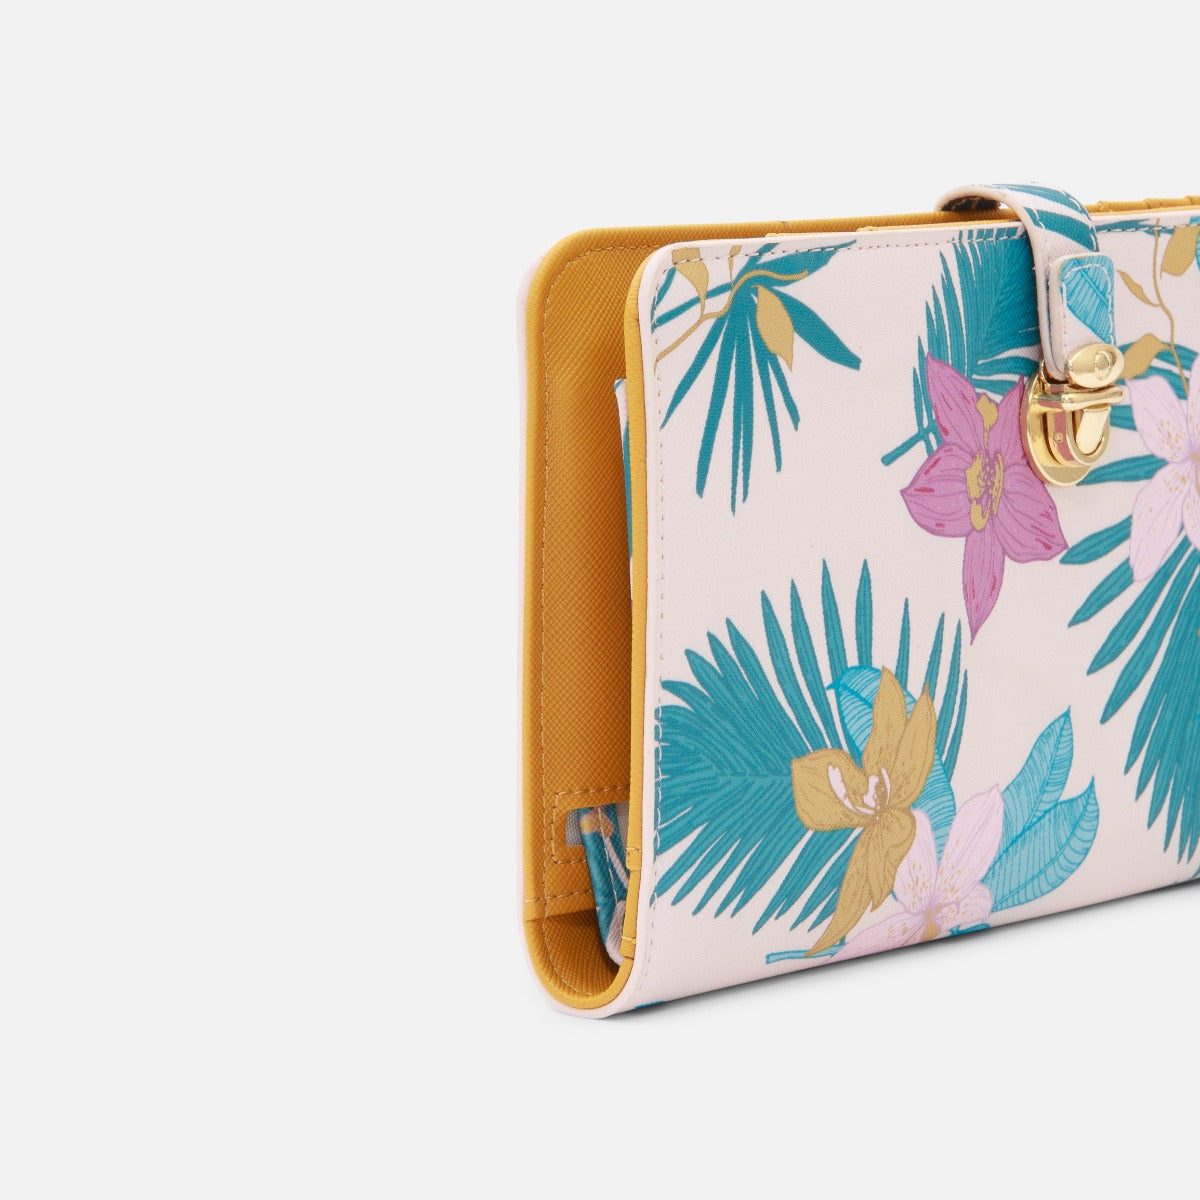 Passport case with tropical pattern